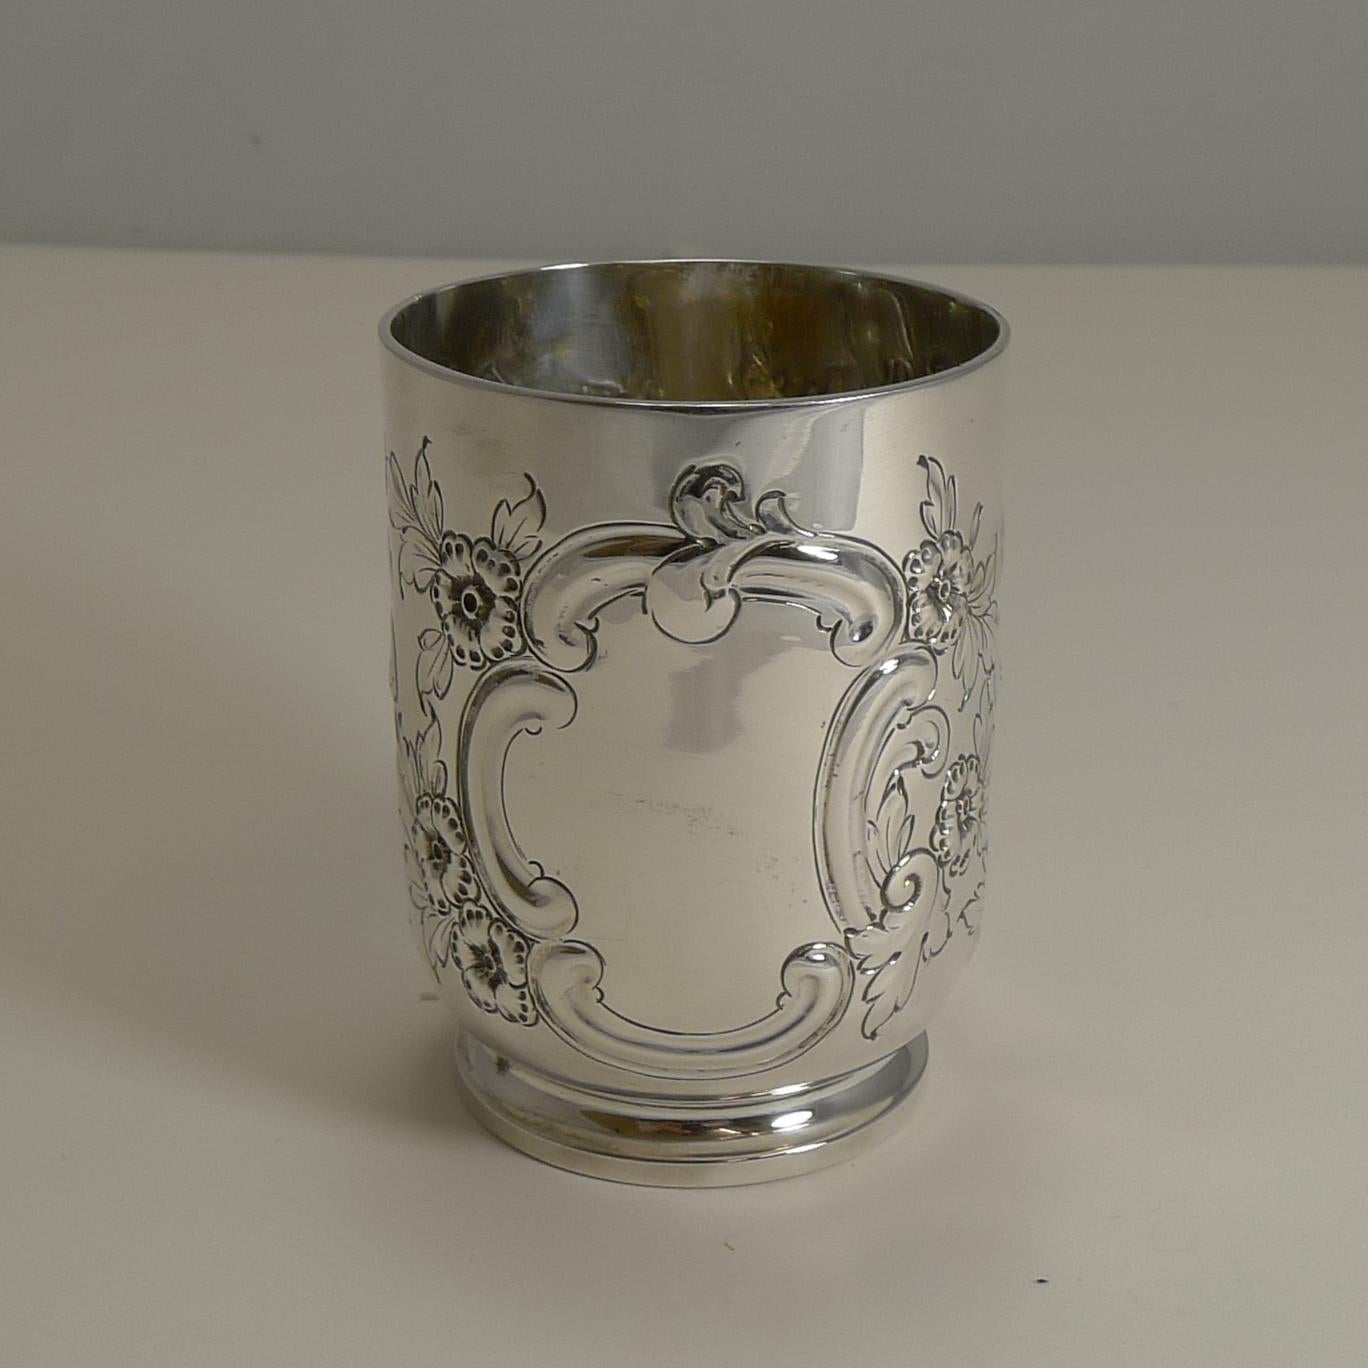 A stunning antique English Christening / child's mug perfect for an heirloom gift for the newest addition to your family.

A good gauge silver, the mug weighs 6.2 Troy Ounces / 192.9 grams. The mug has a beautiful all-over repousse and hand-chased